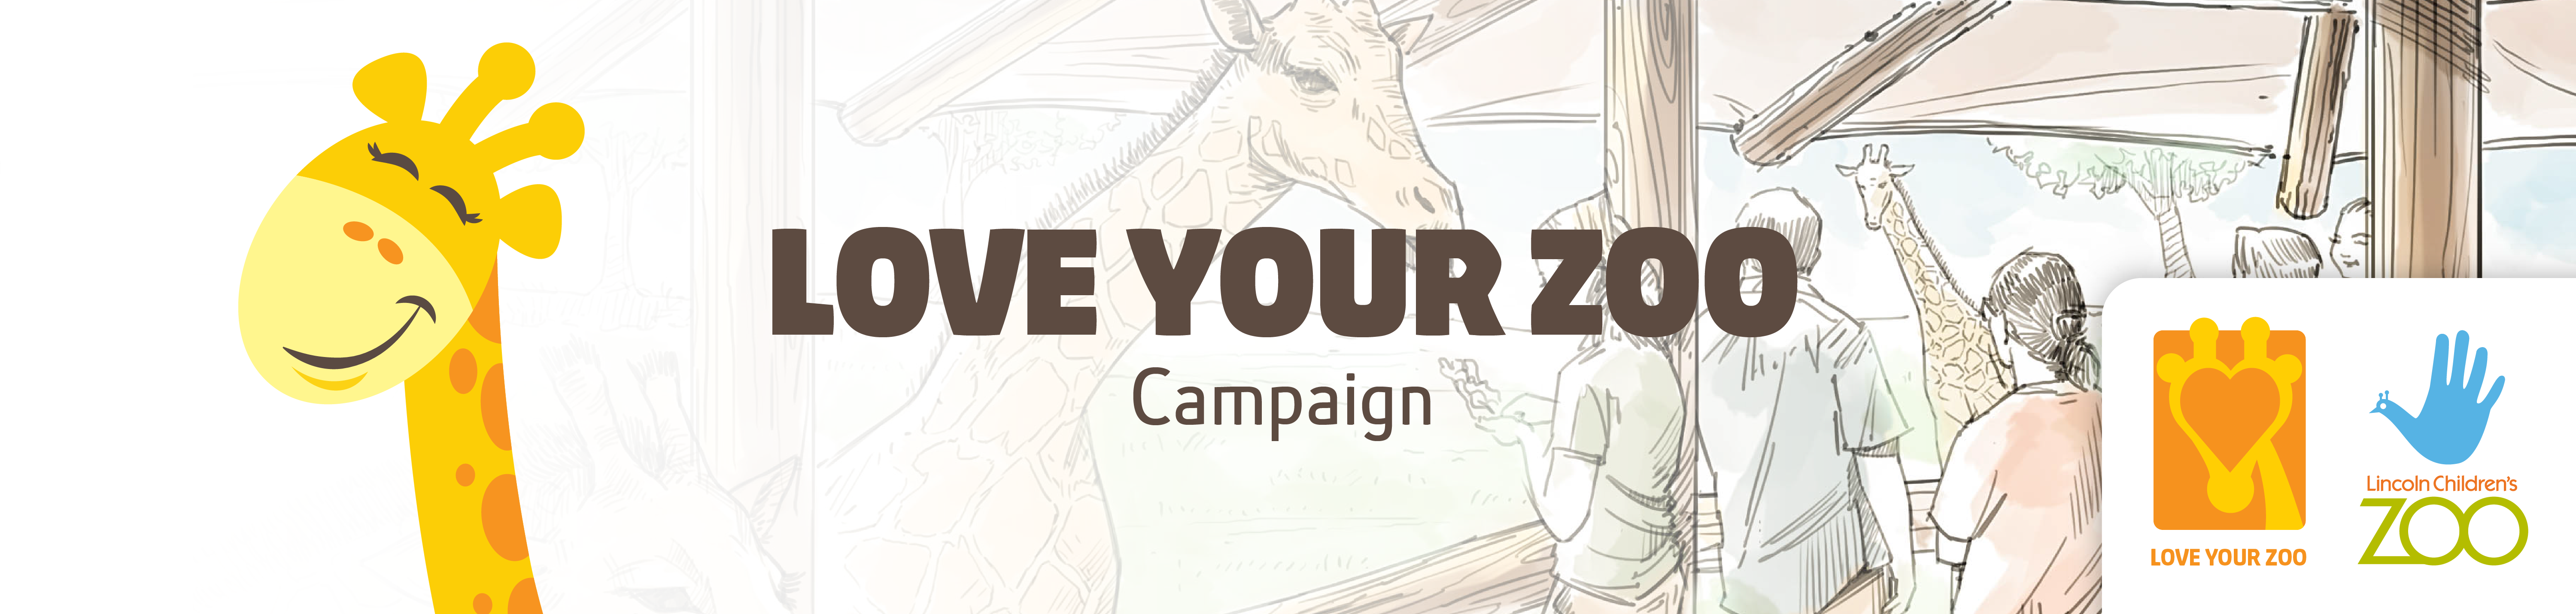 Love Your Zoo Campaign Lincoln Children's Zoo